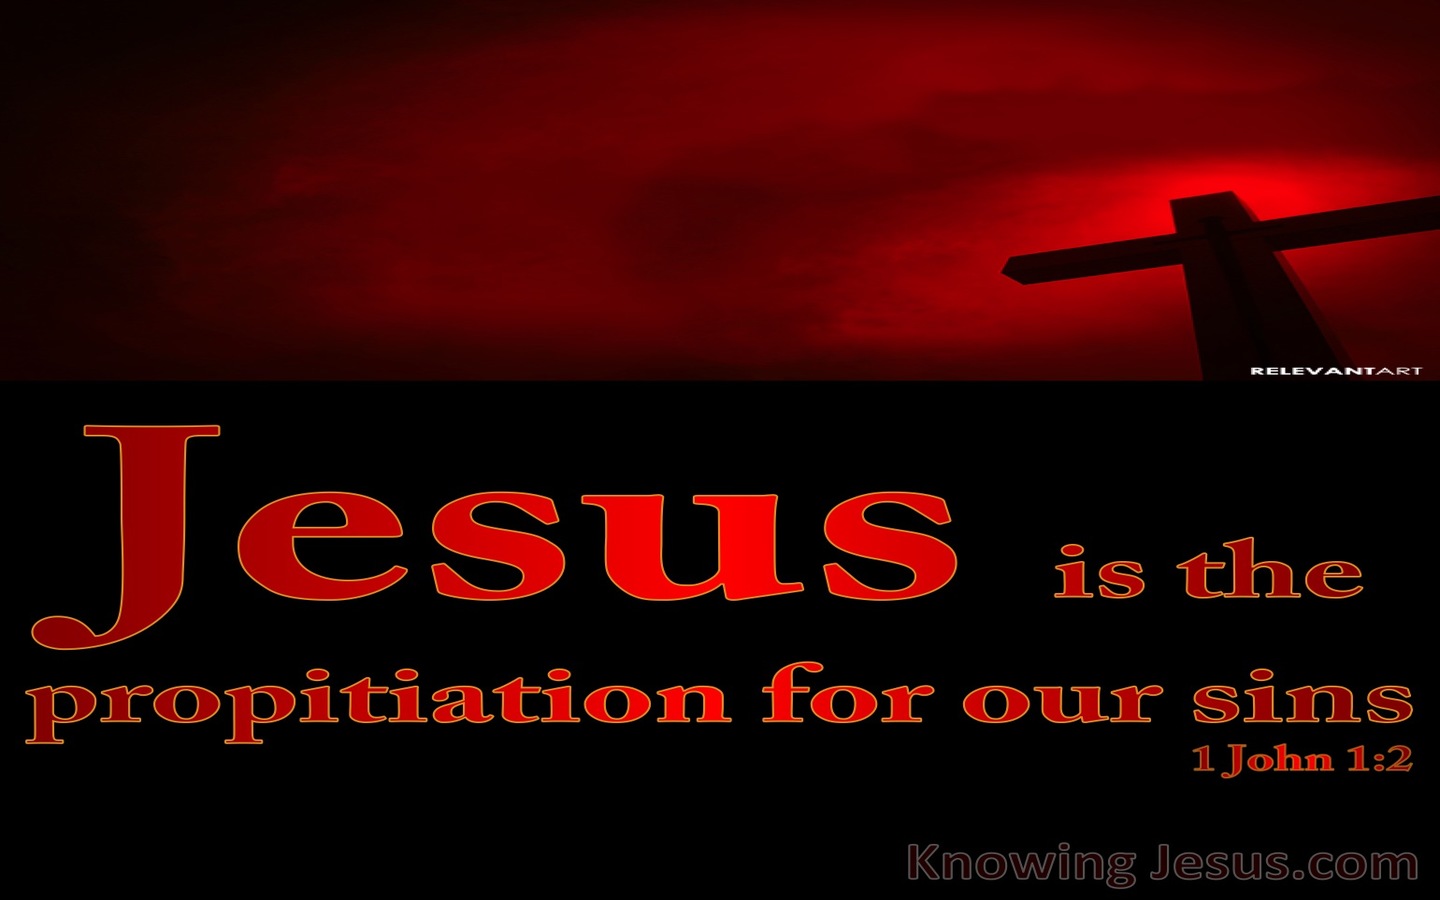 1 John 2:2 Propitiation For Our Sins (red)